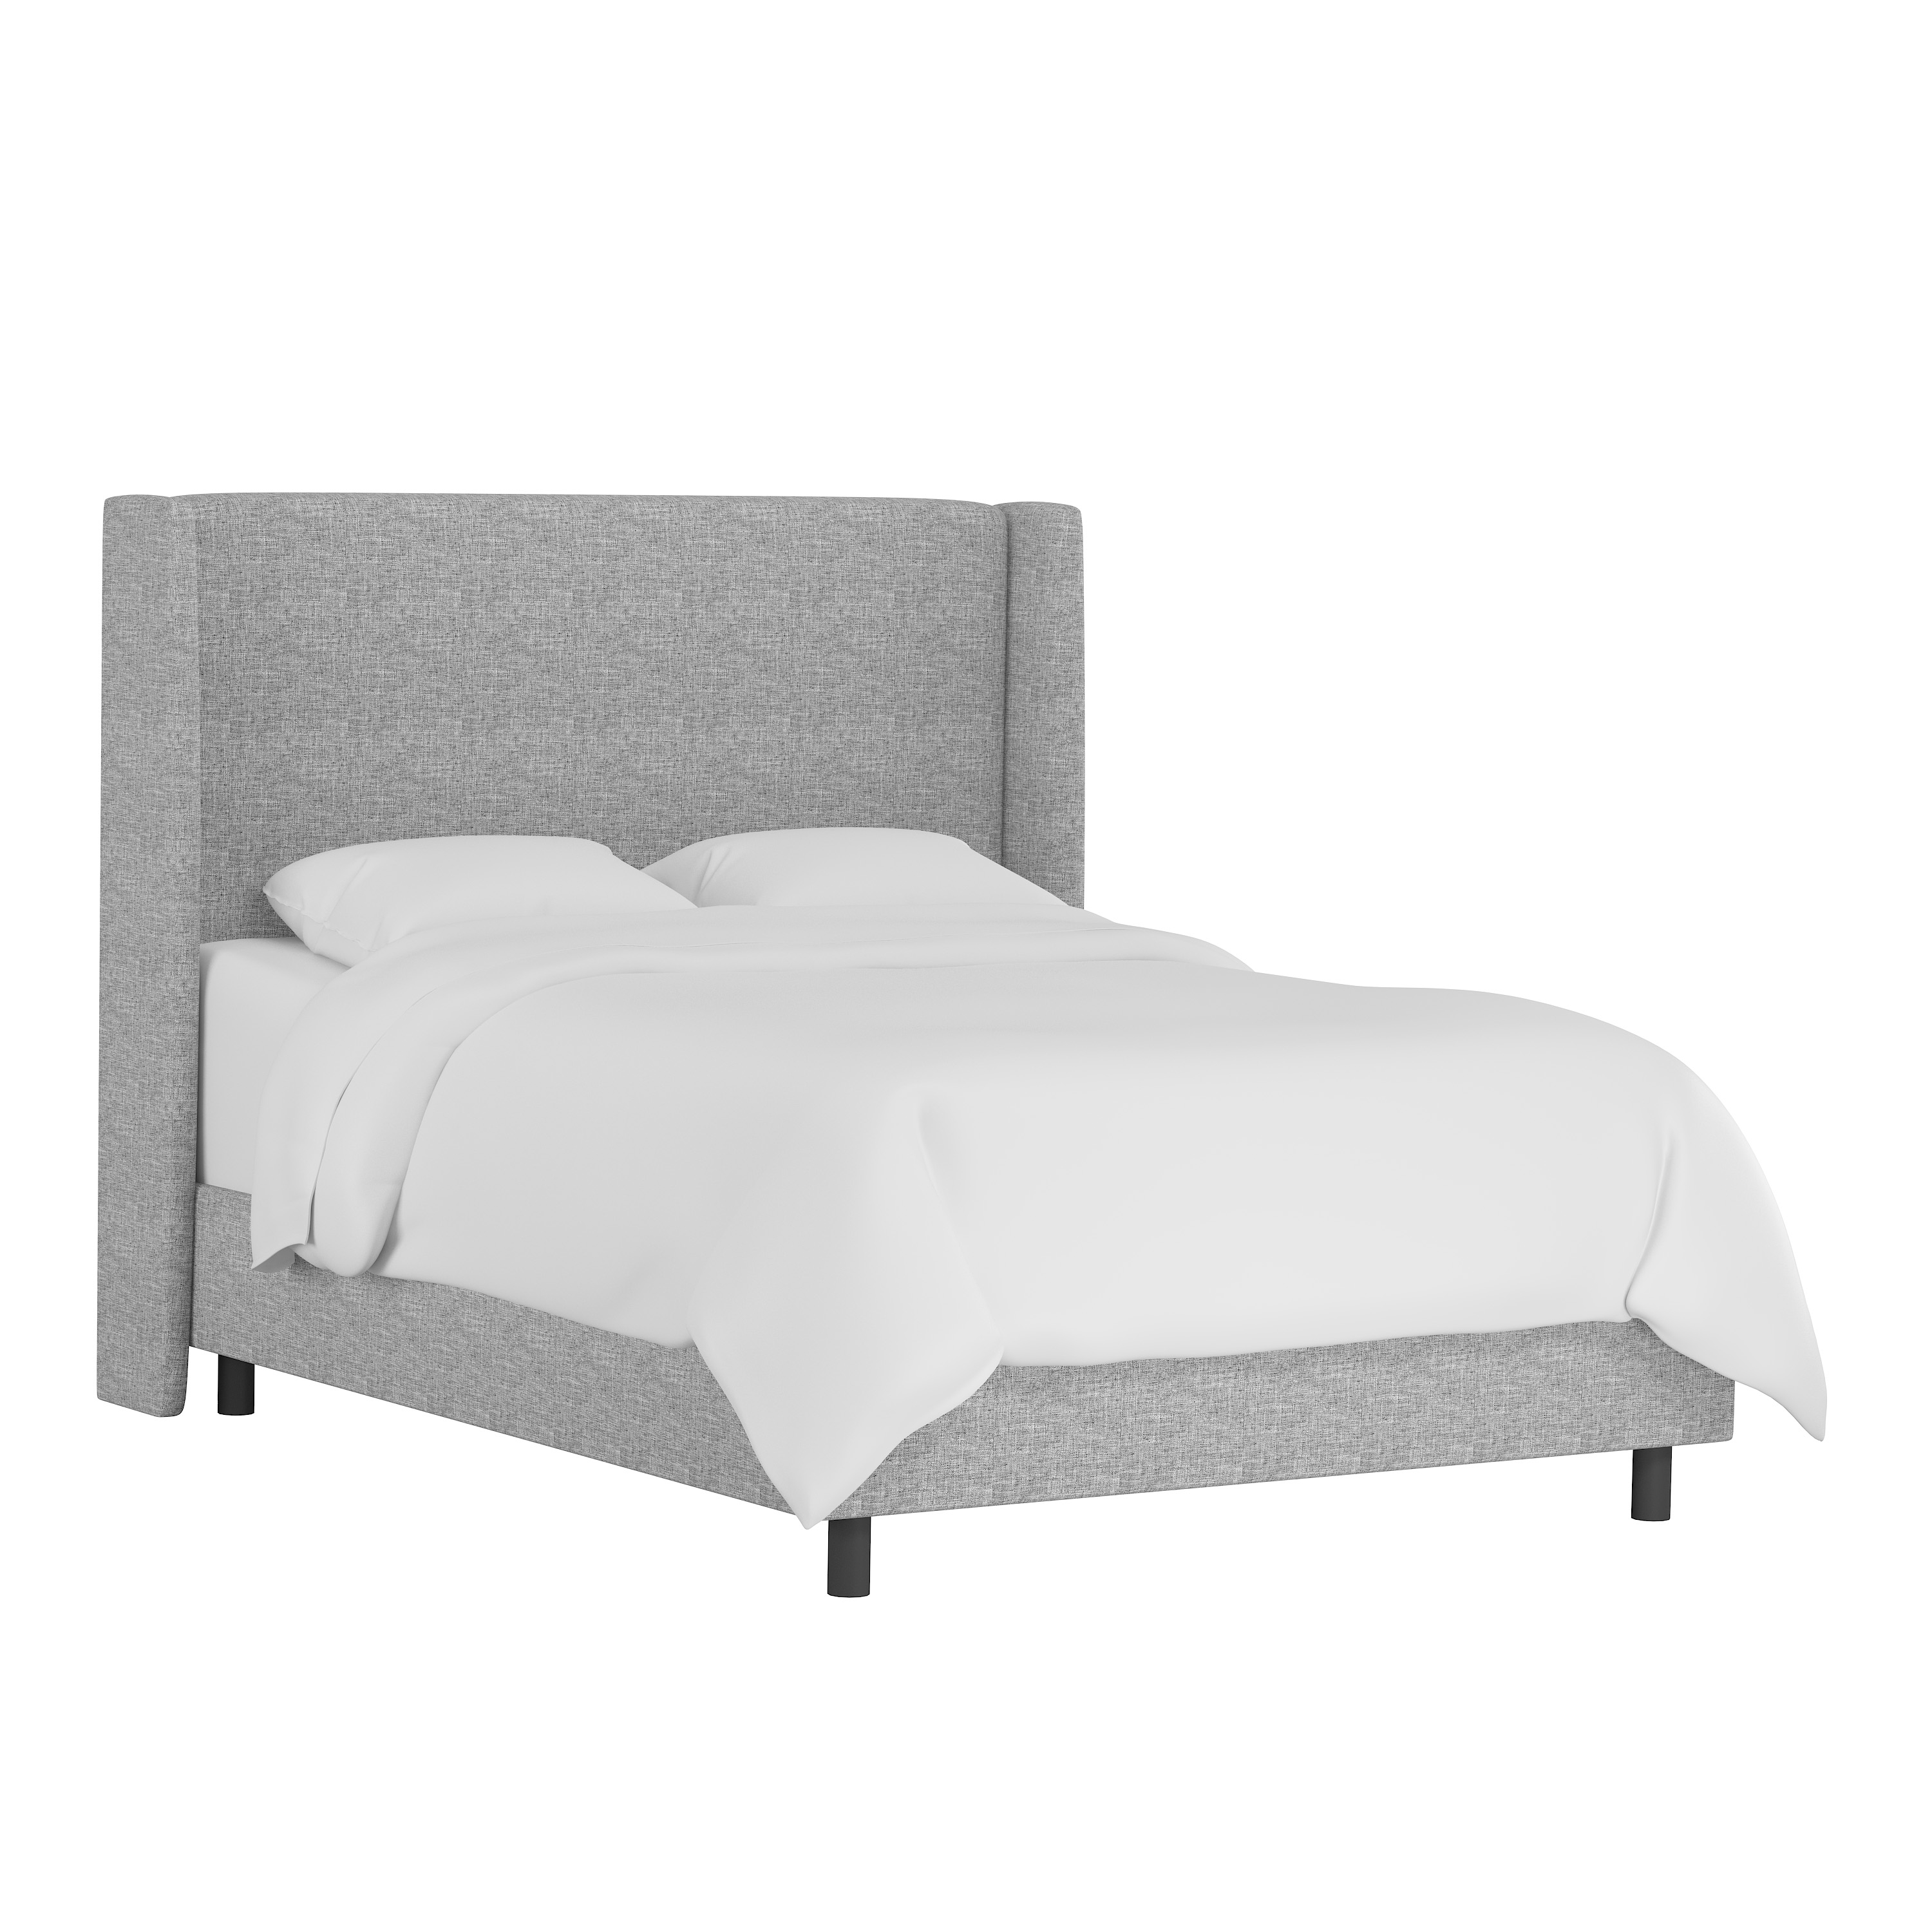 Queen Lawrence Wingback Bed in Zuma Pumice - Image 1